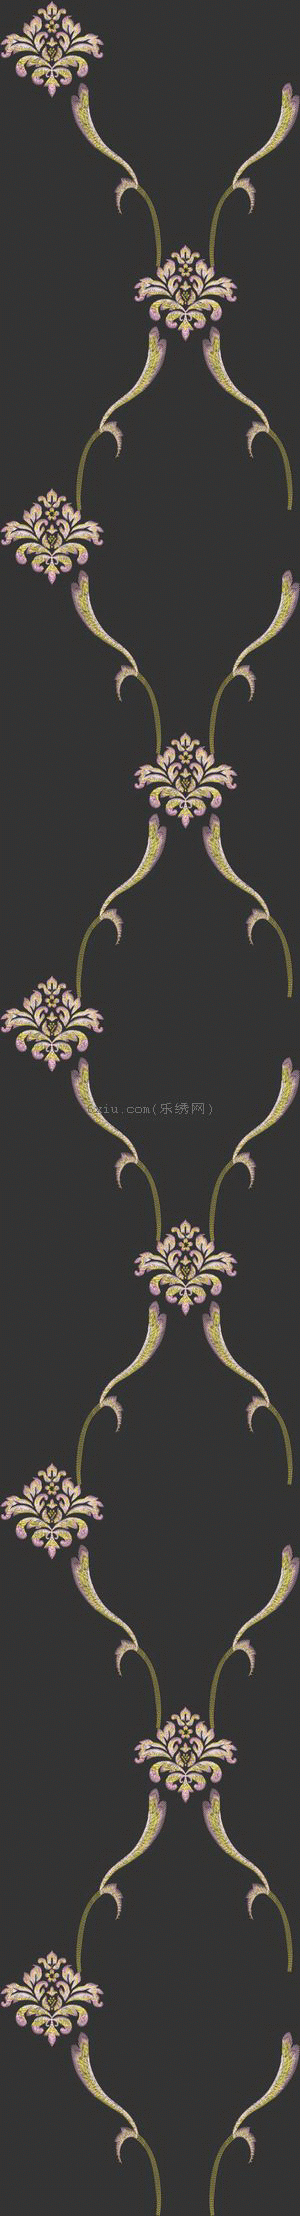 Soft decoration curtains embroidery pattern album